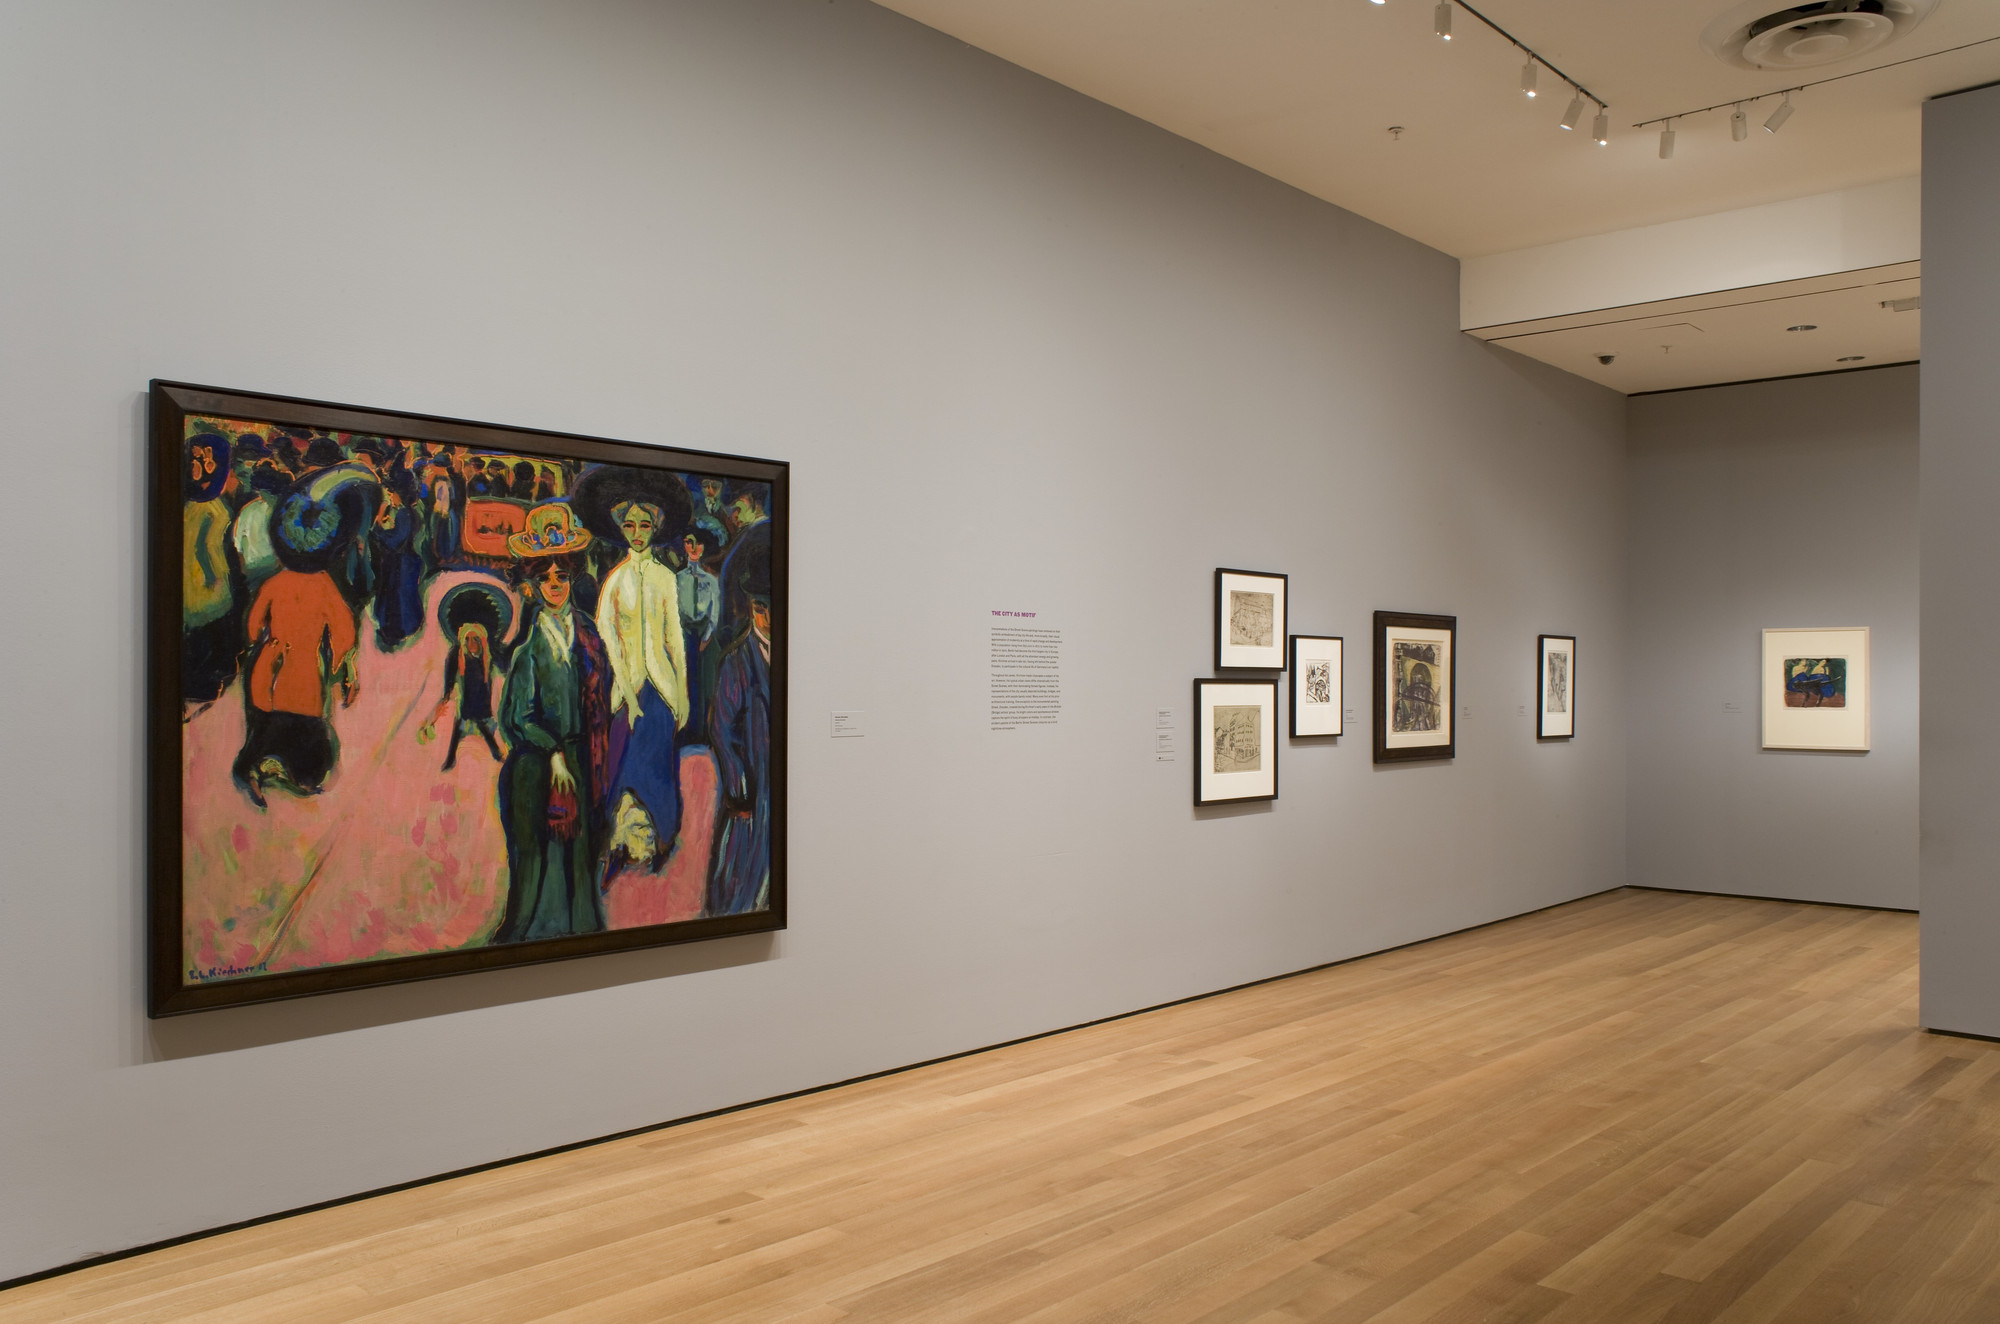 Installation view of the exhibition, "Kirchner and the Berlin 1913-15" MoMA